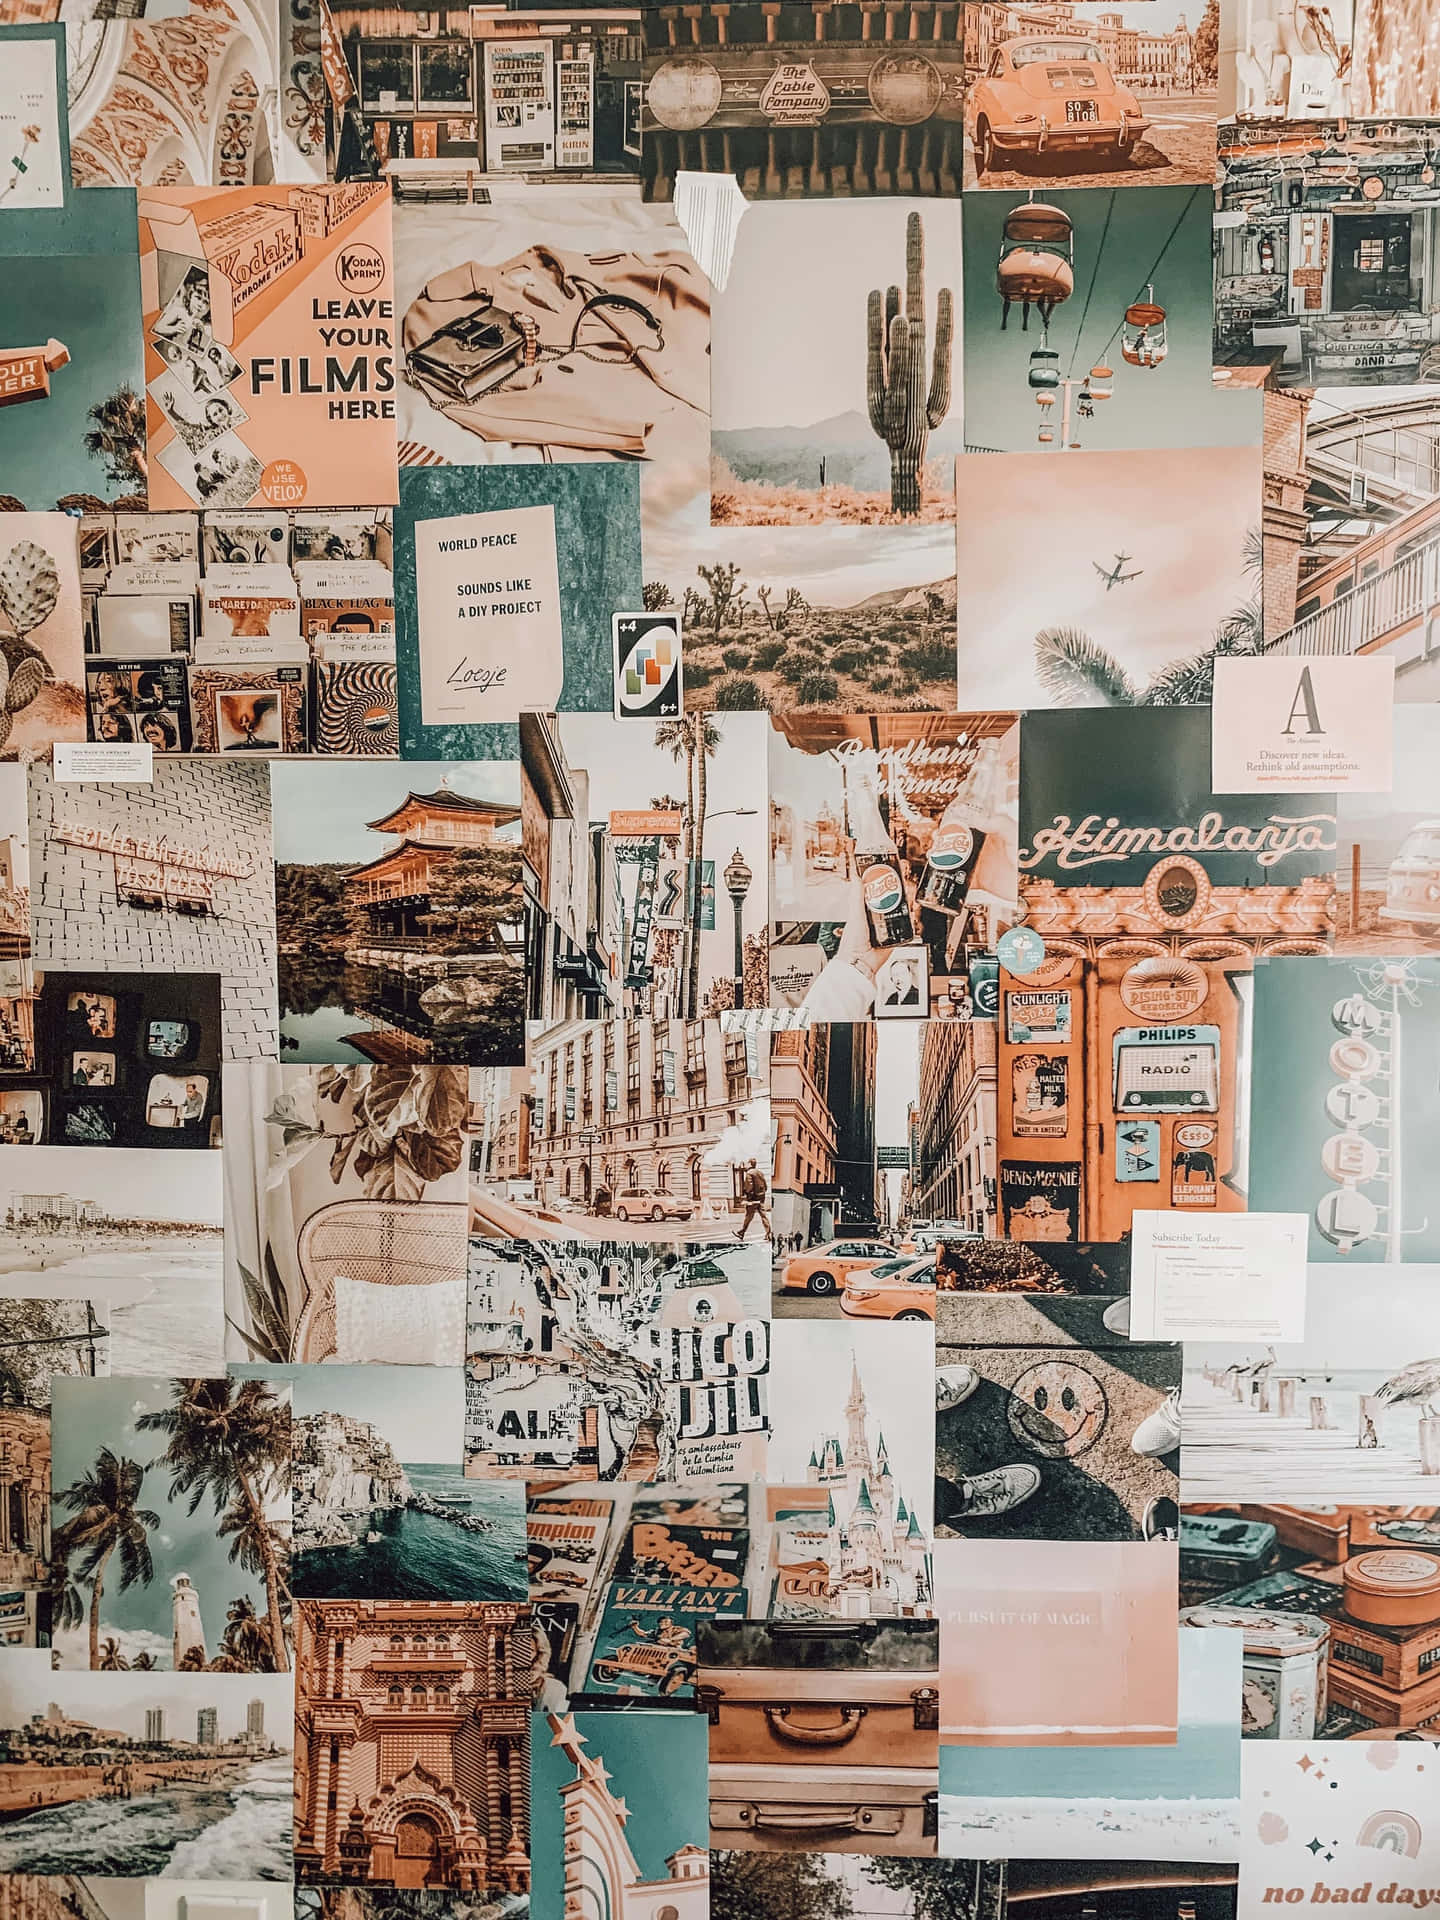 A Wall With Many Pictures And Photos On It